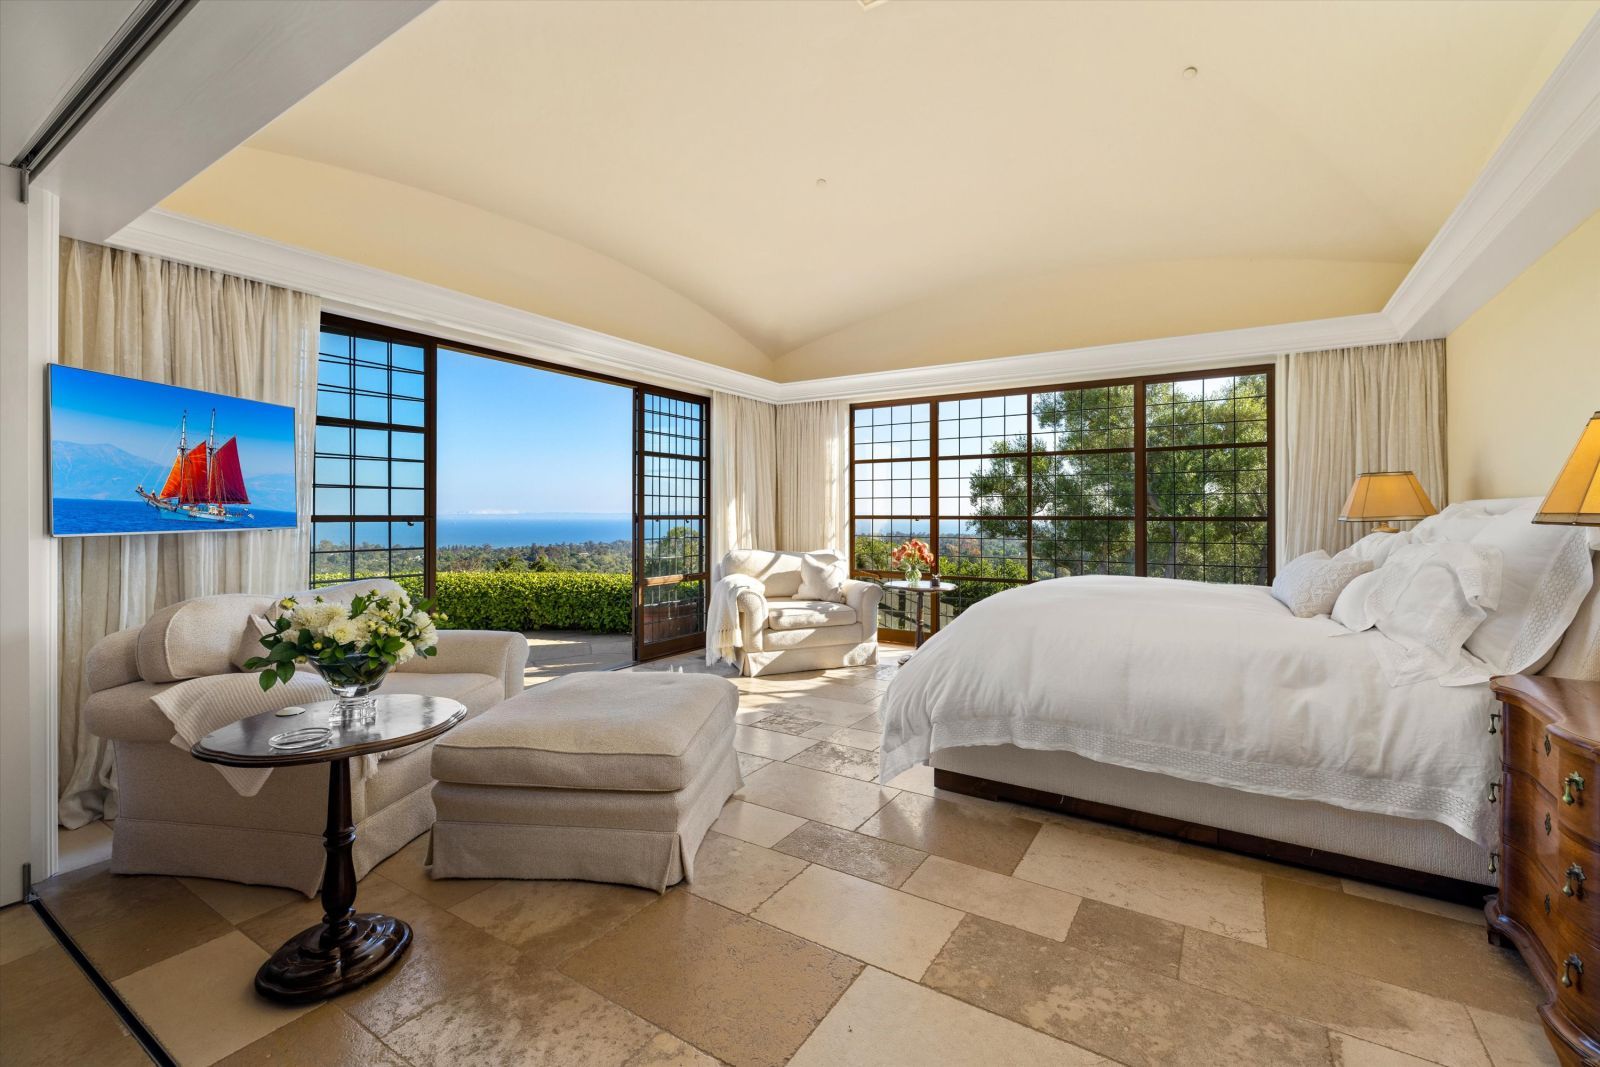 Primary bedroom of a luxury Montecito home, with a plush bed and walls of multi-pane glass looking out to the ocean